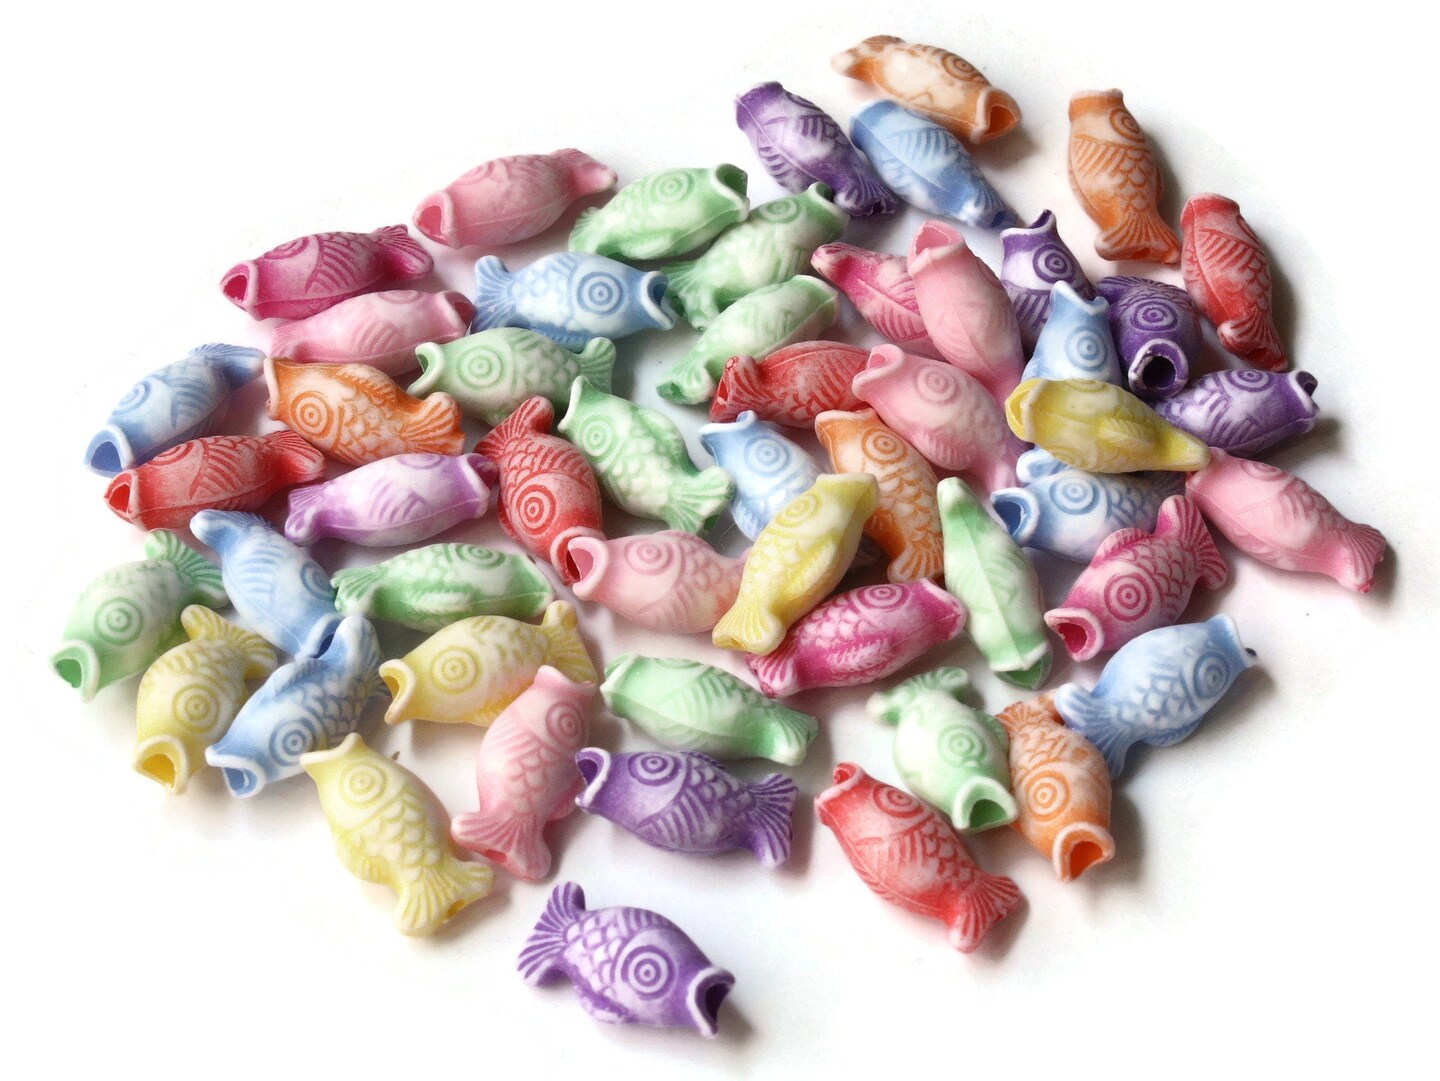 50 17mm Mixed Colors Fish Plastic Beads Loose Miniature Animal Beads